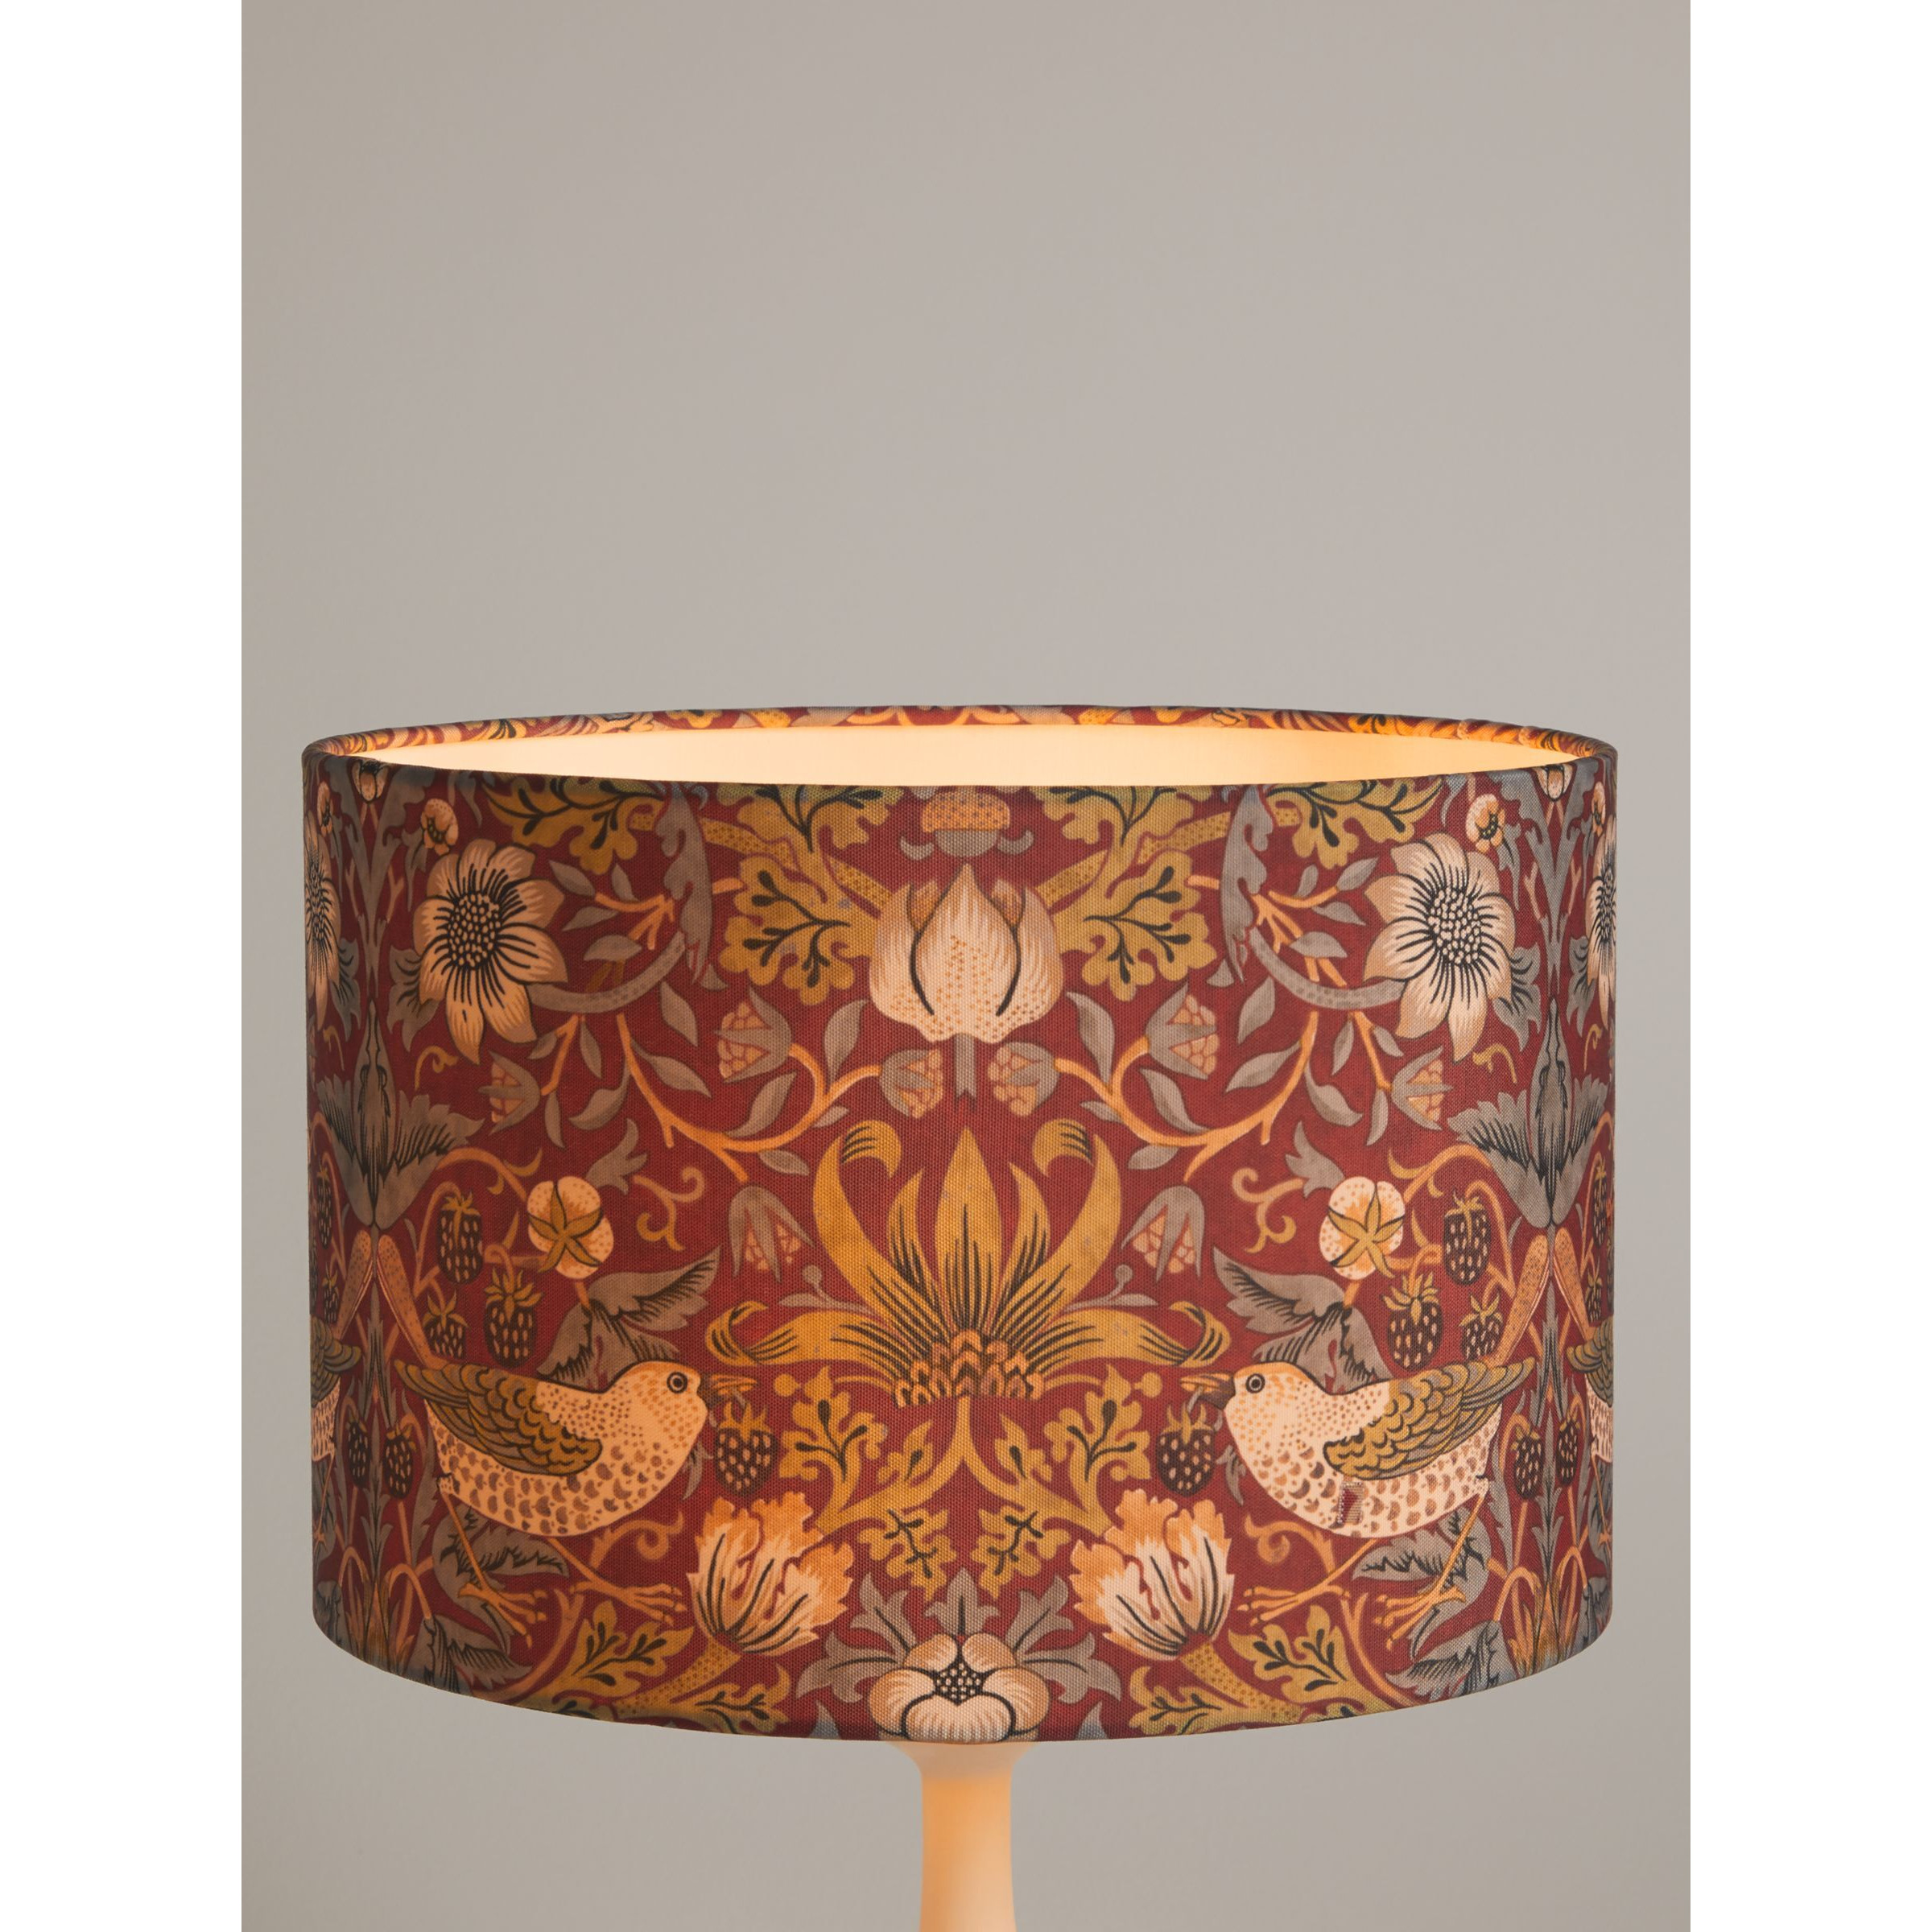 Morris & Co. Strawberry Thief Lampshade - image 1